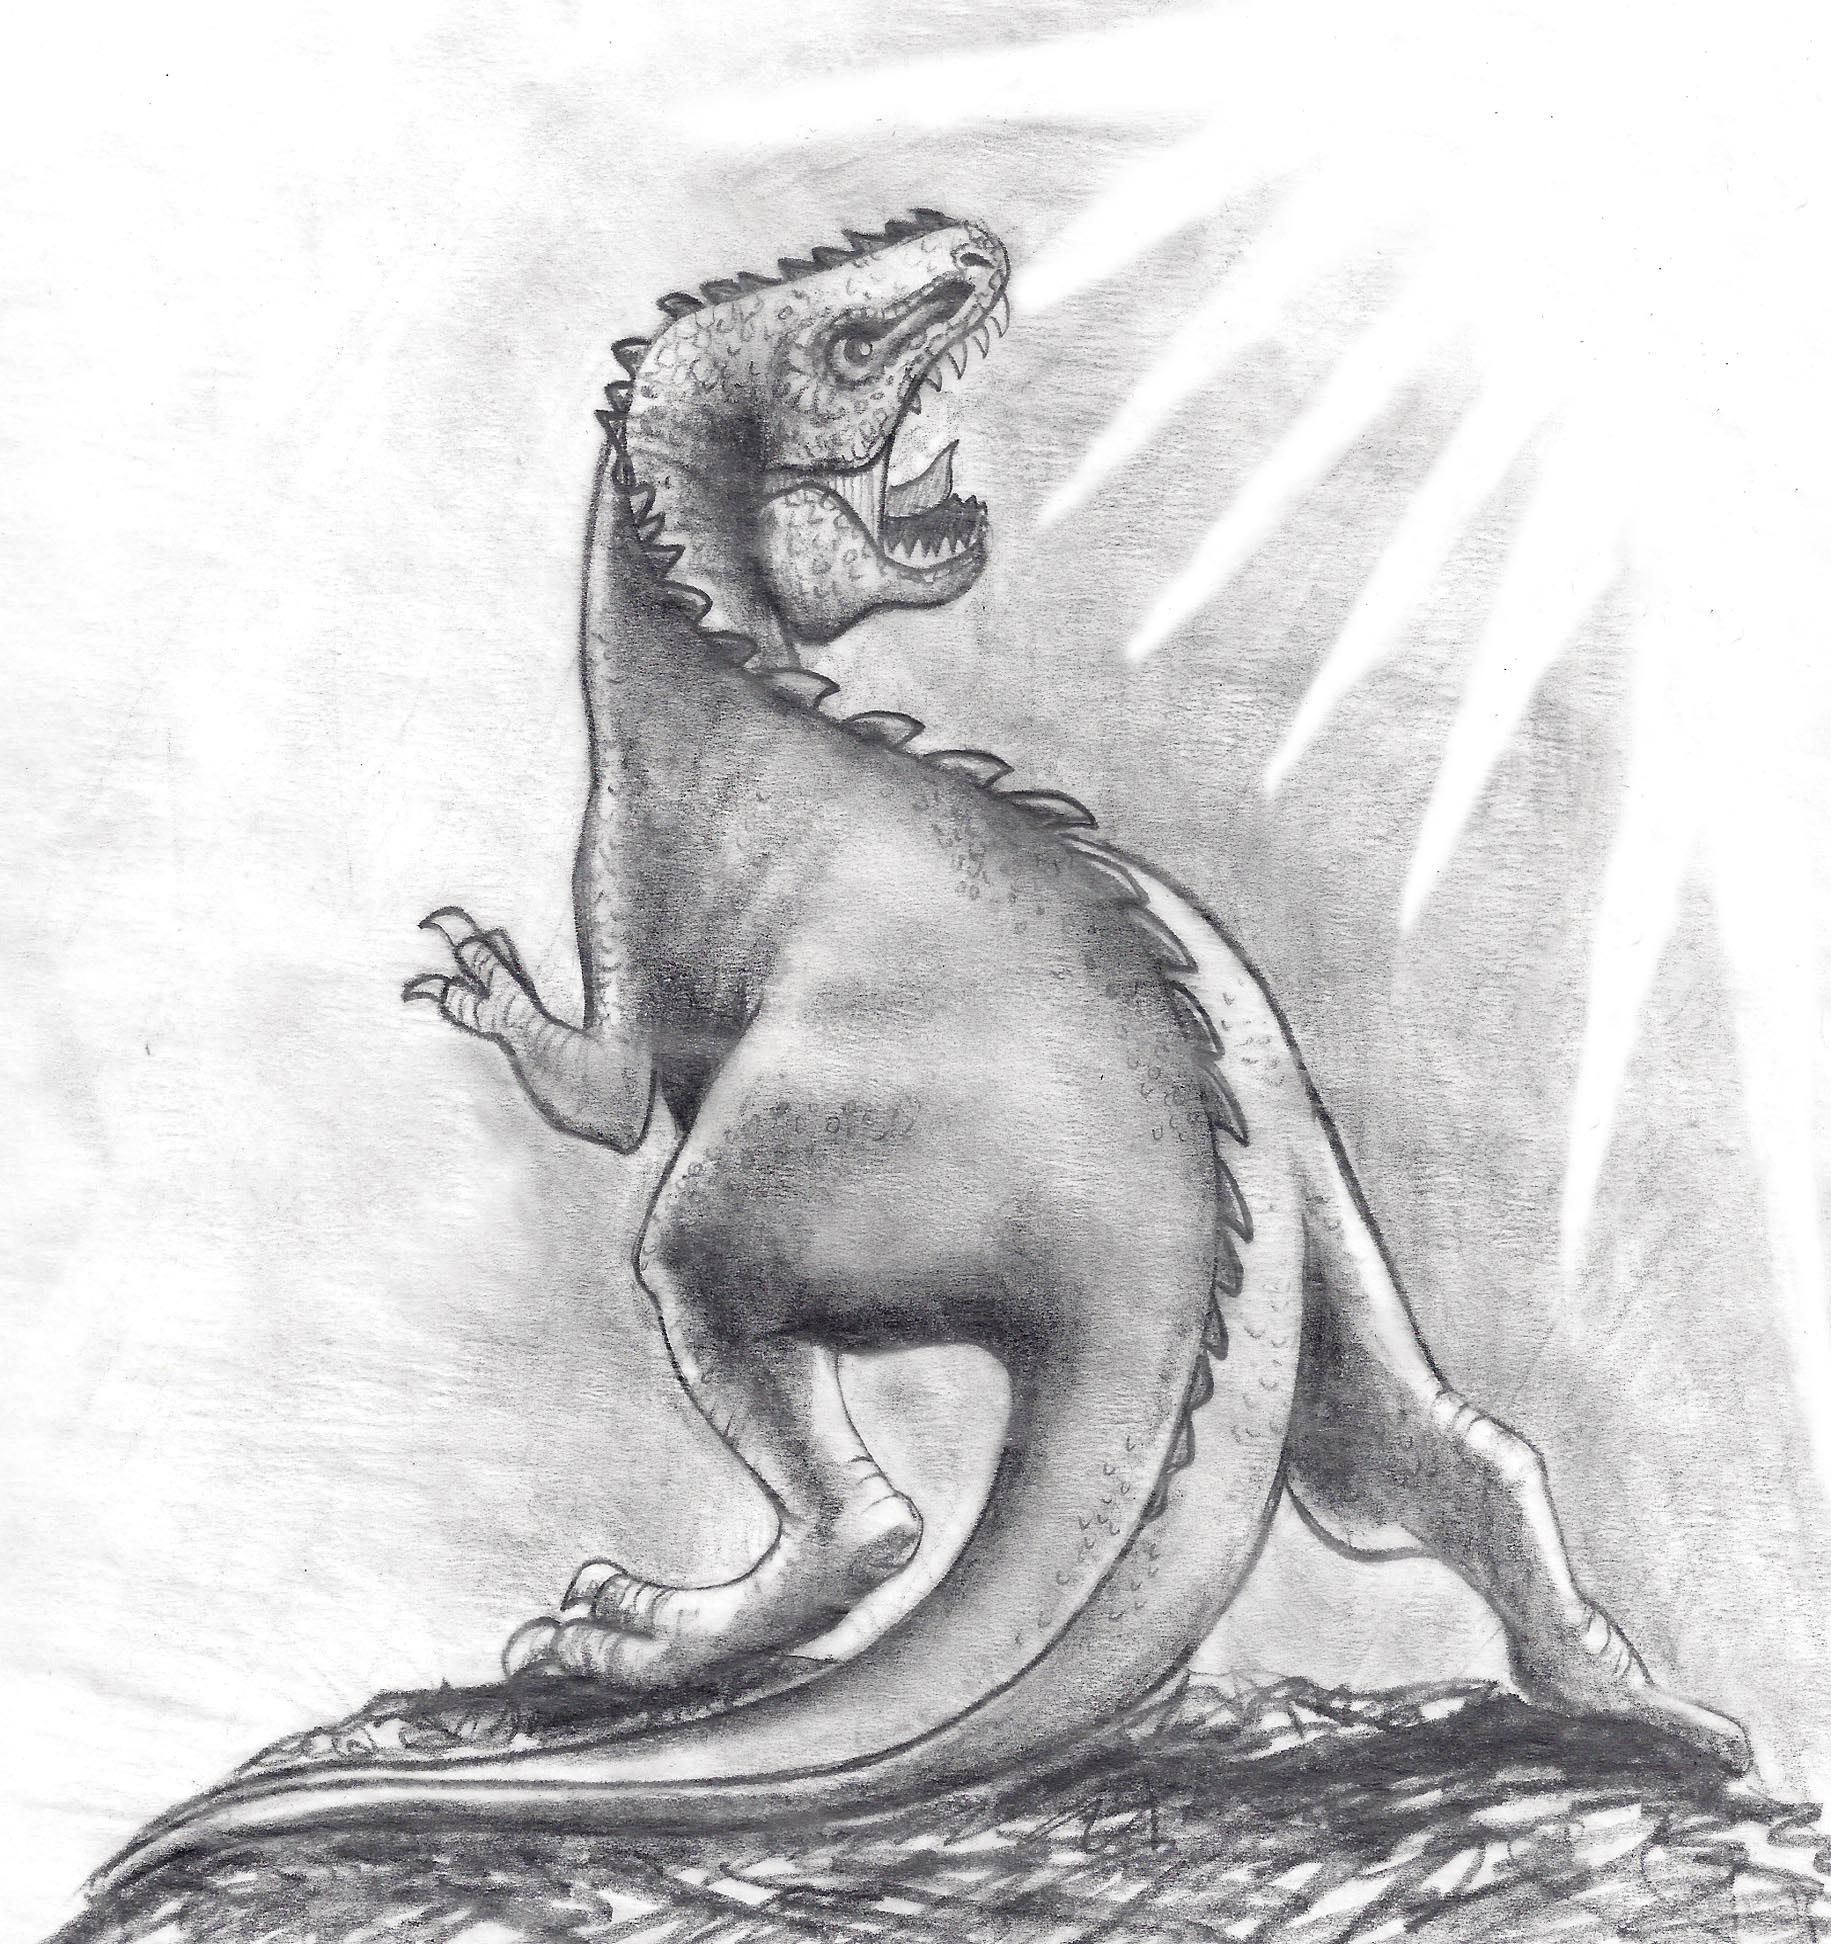 Dinosaur Pencil Drawing at Explore collection of